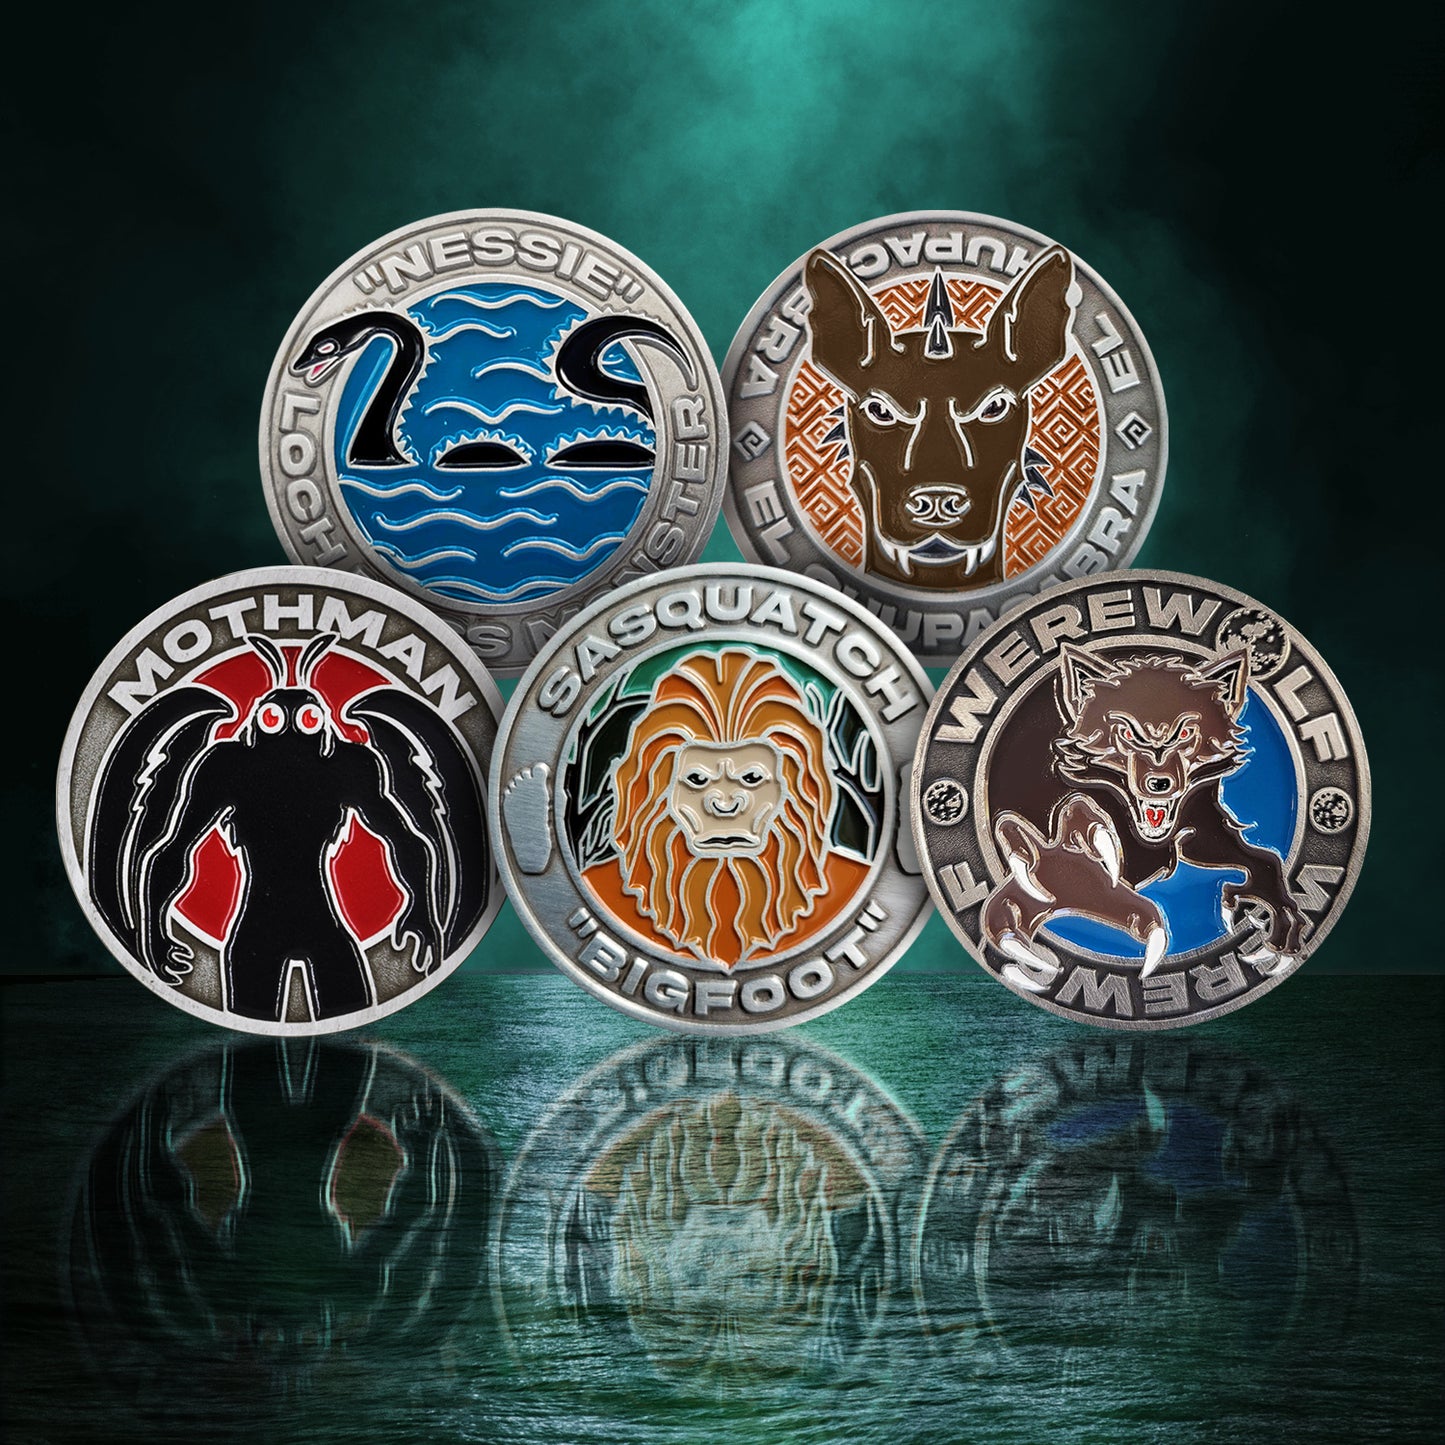 Five challenge coins in two rows, sitting above dark green water in the nighttime sky. Each coin depicts a Cryptid covered by Aaron Mahnke's "Lore" podcast: Nessie, Chupacabra, Sasquatch, Mothman, and Werewolf.